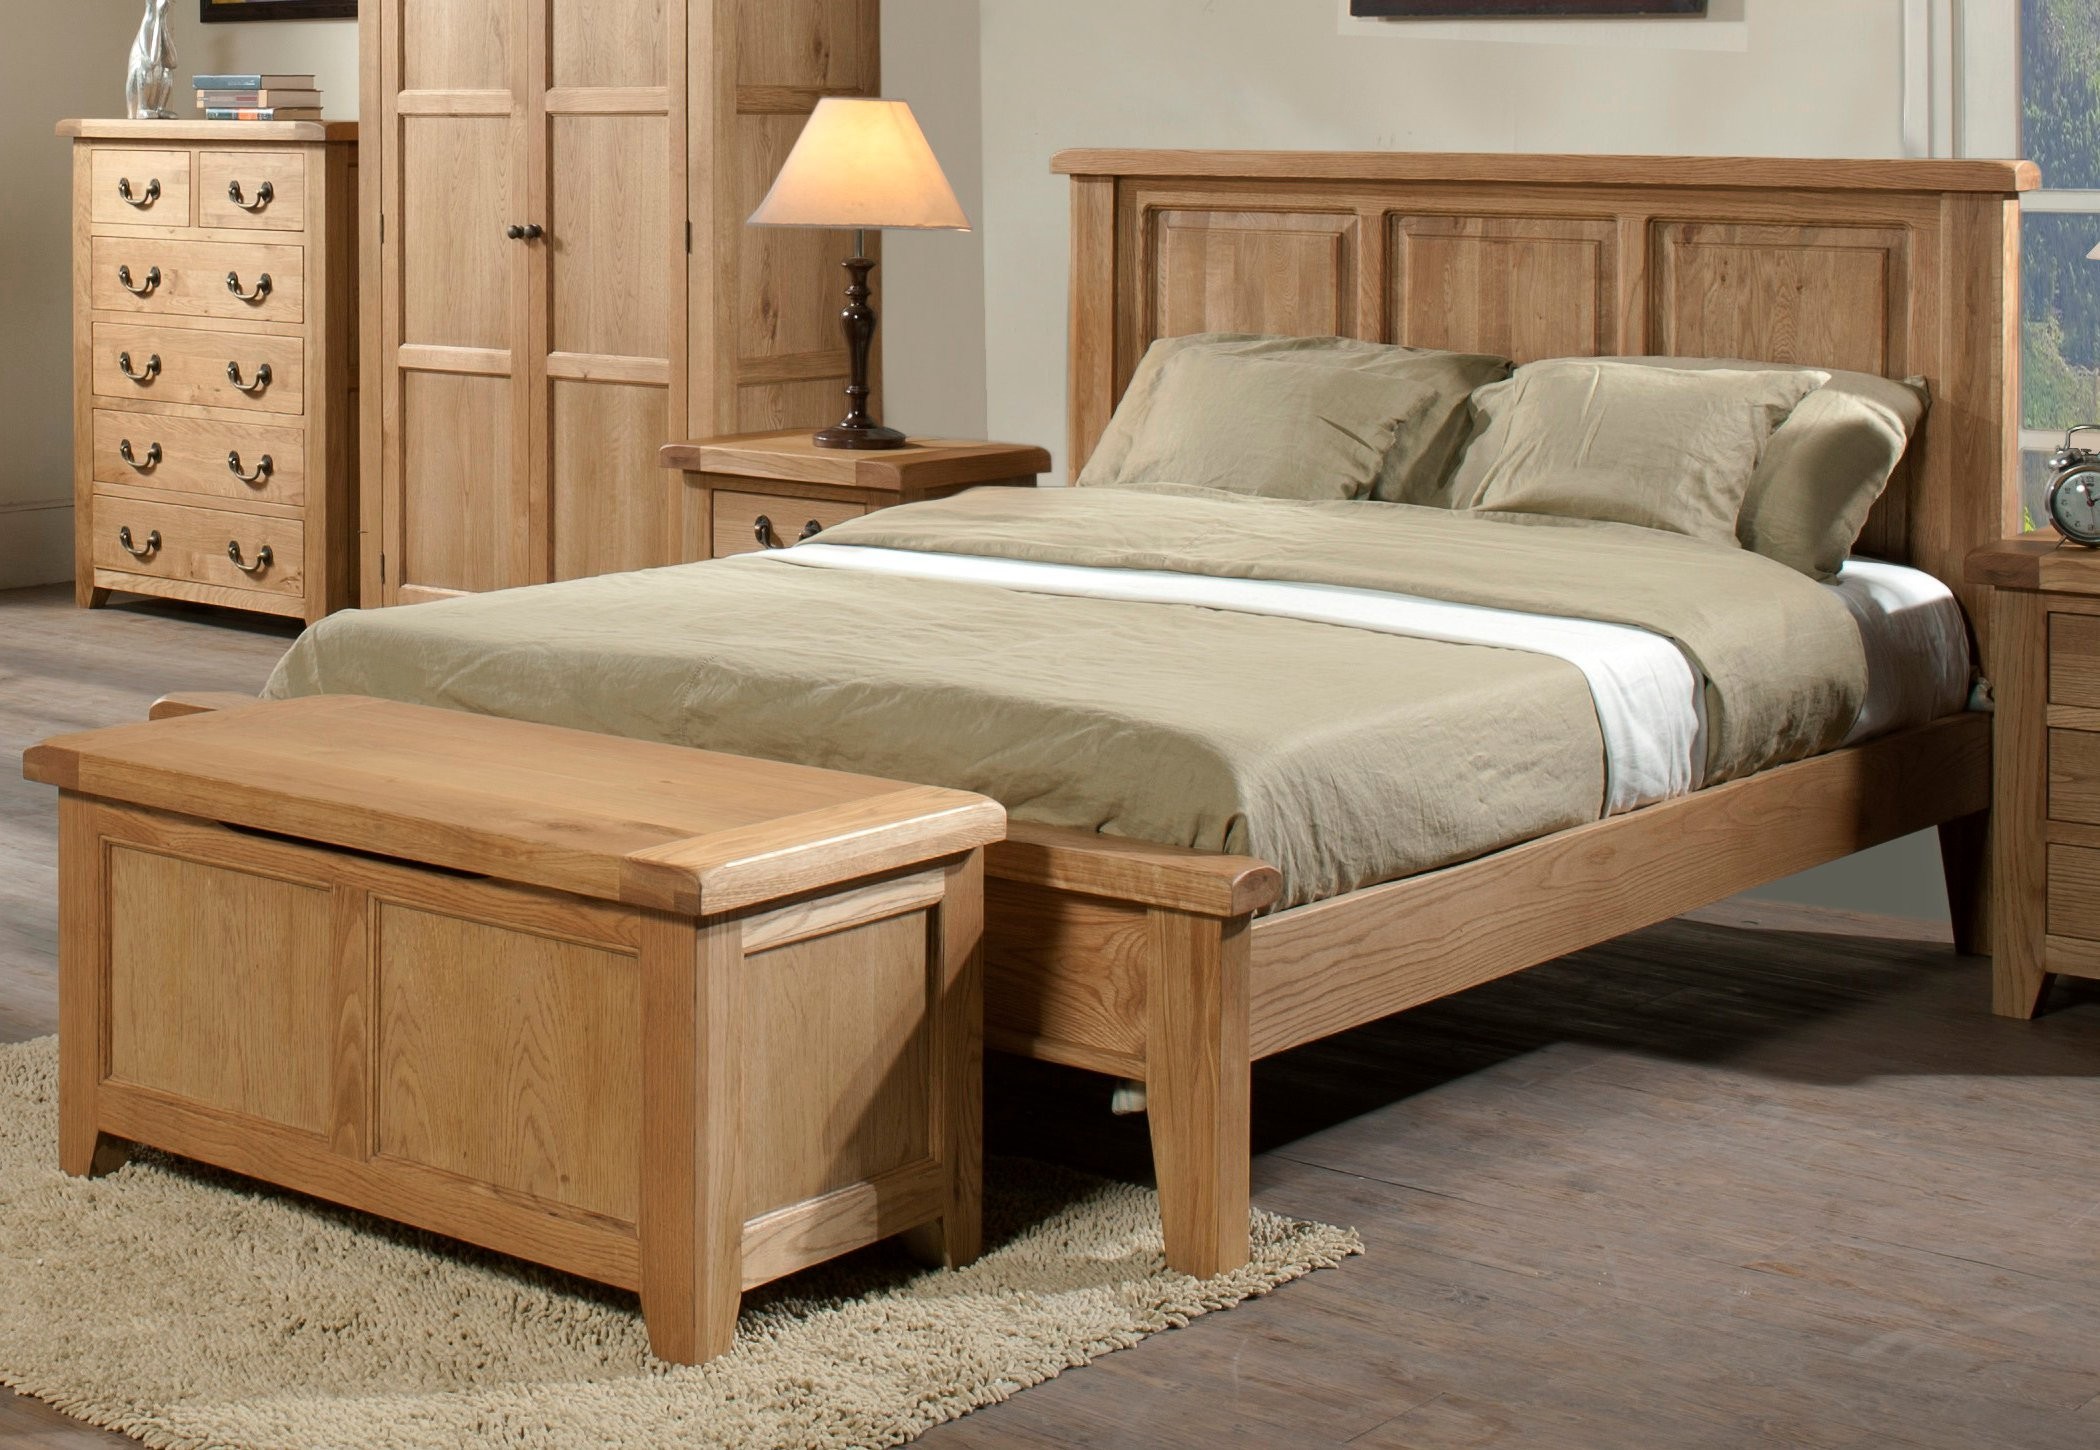 Wooden beds photo